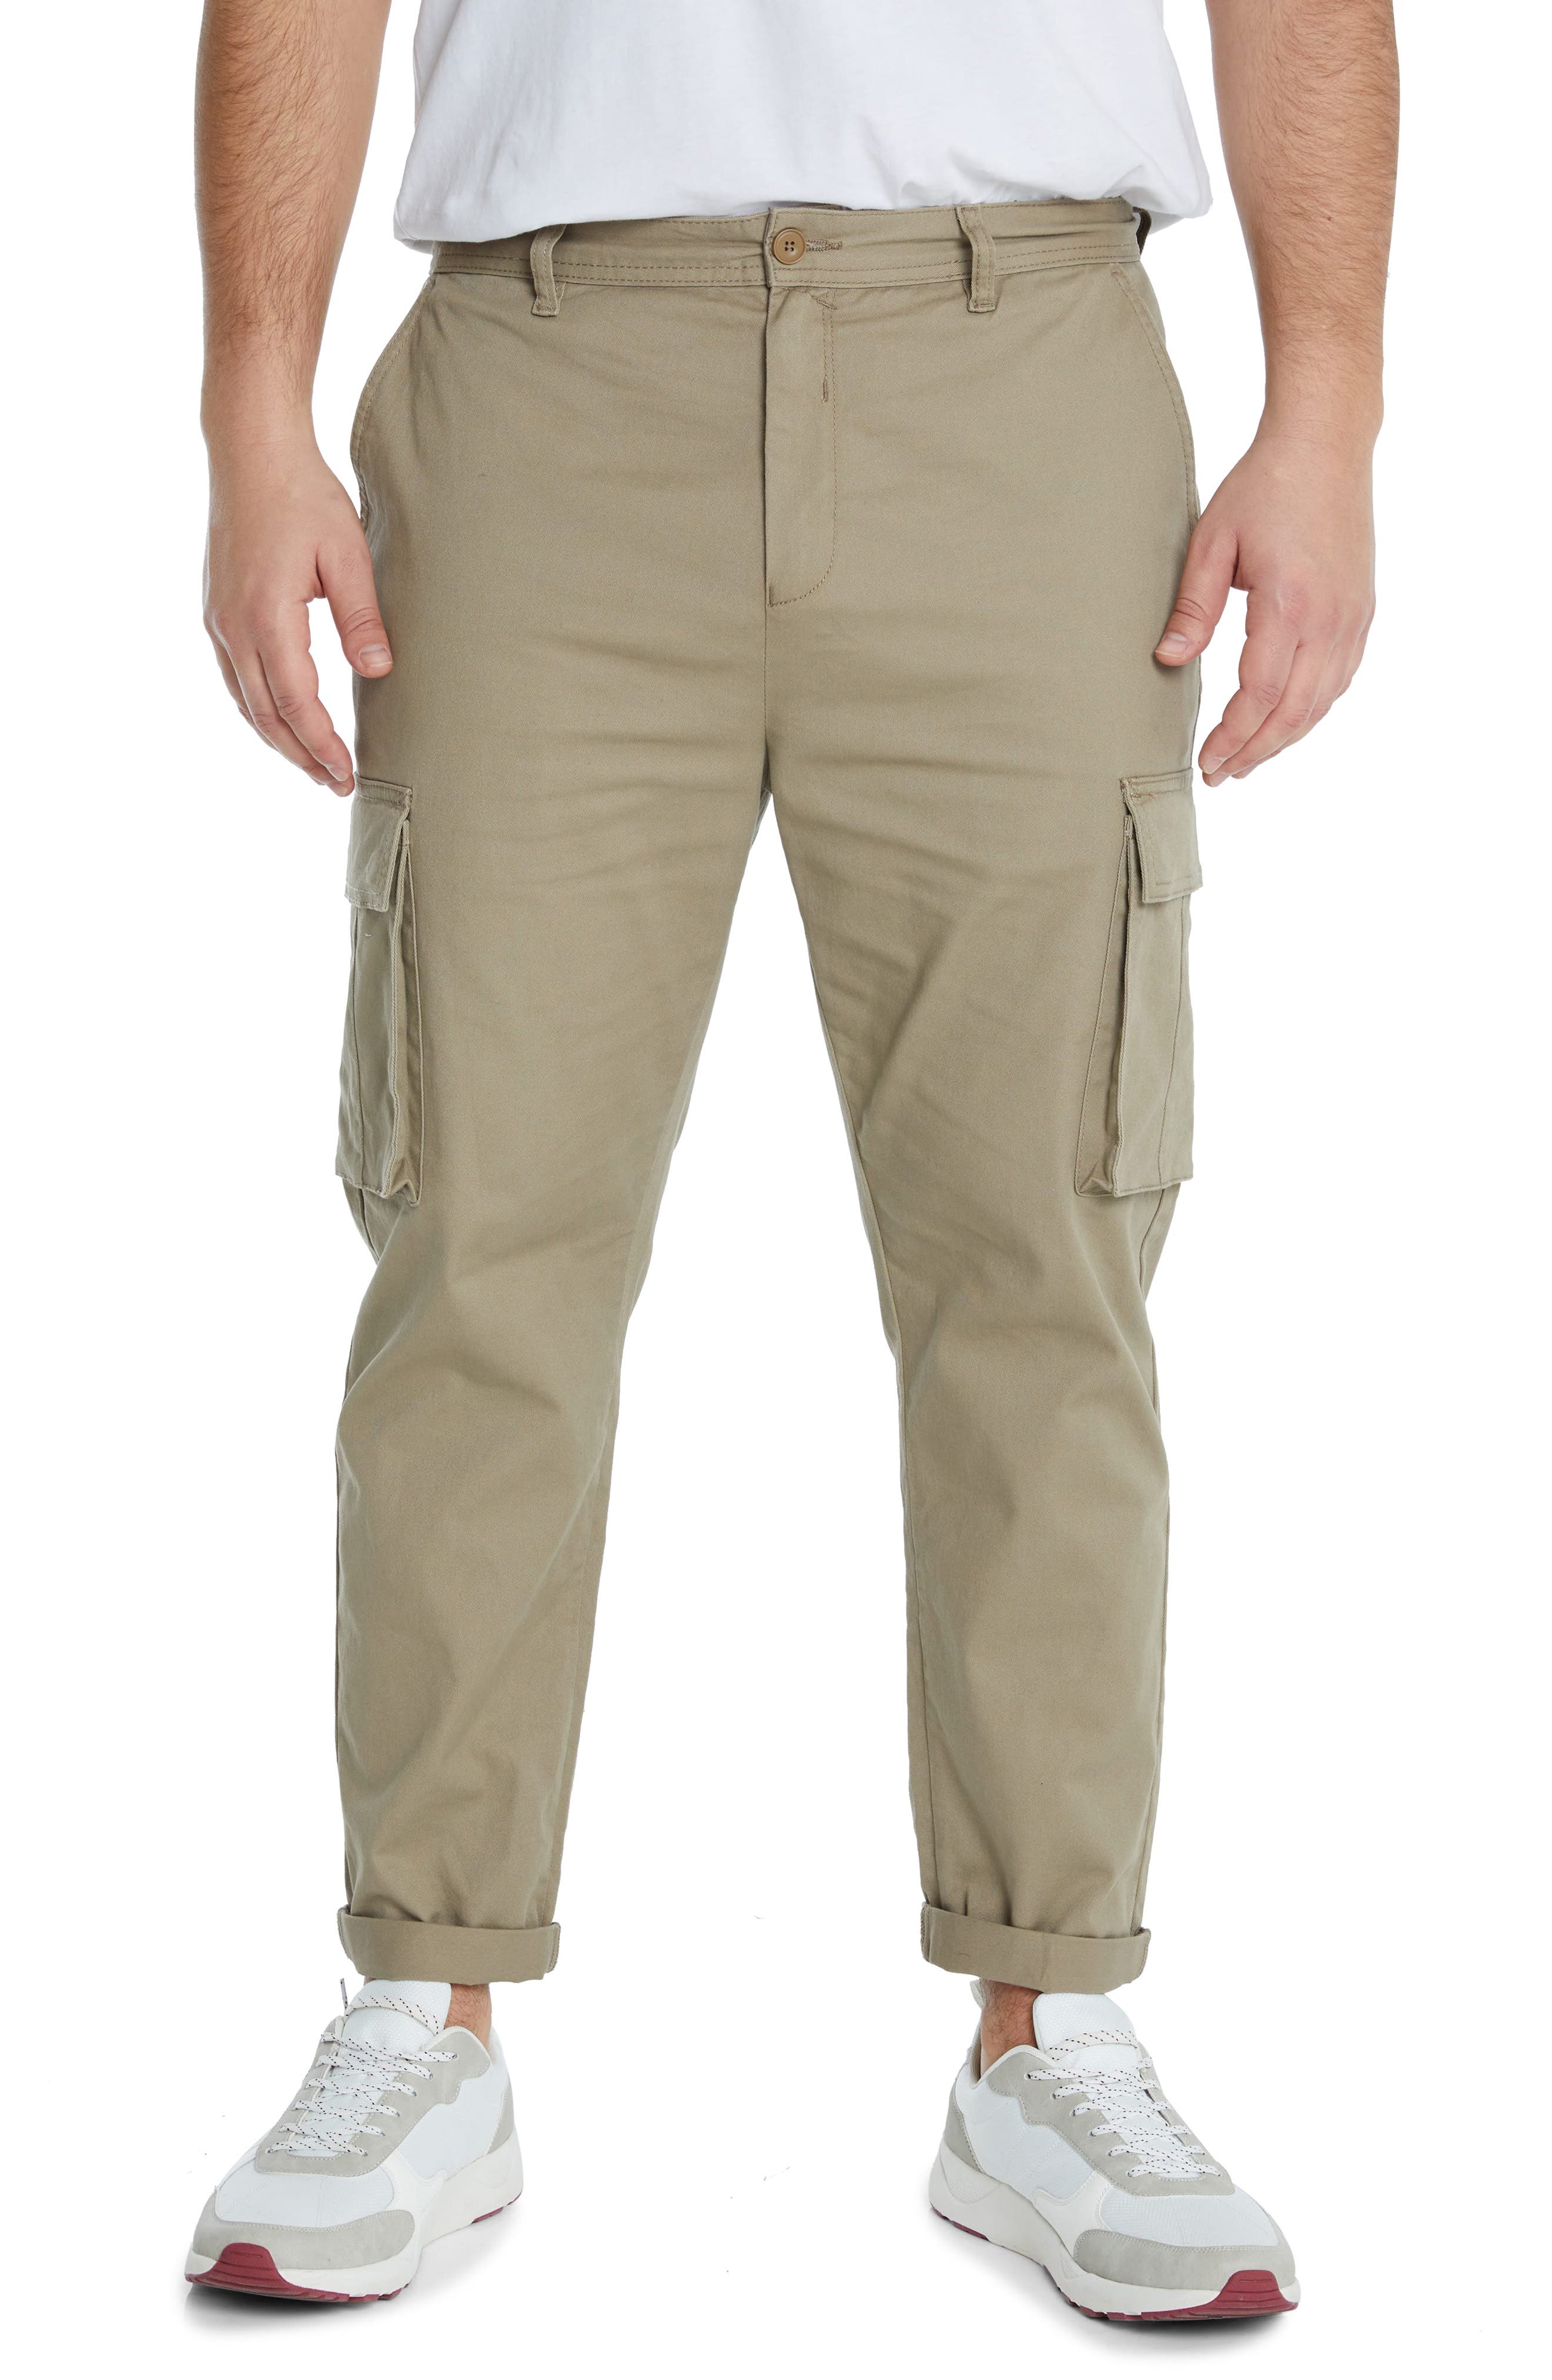 Johnny Bigg Callen Tapered Stretch Cotton Cargo Pants